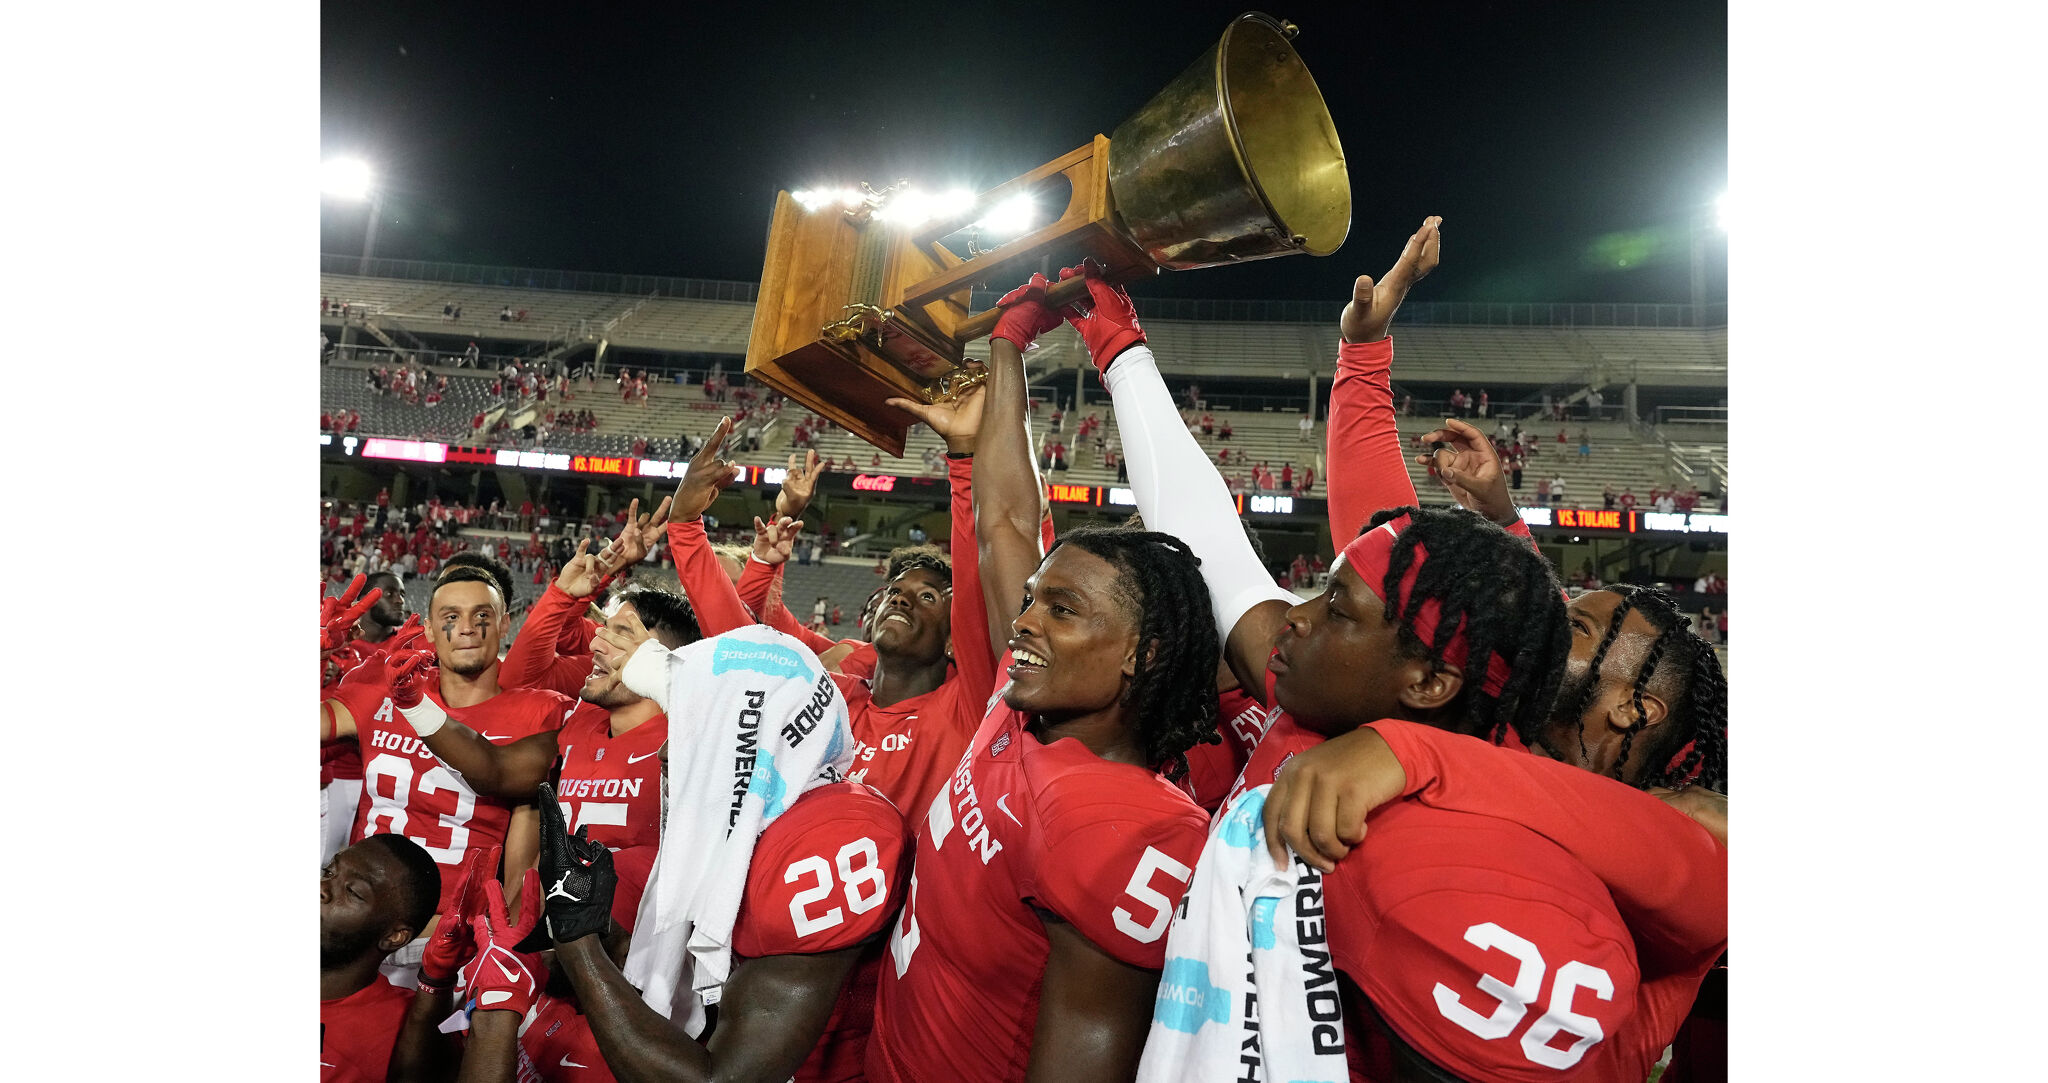 Battle of Houston as the Cougars look to extend their winning streak over  Rice to 8 straight games - Newsday